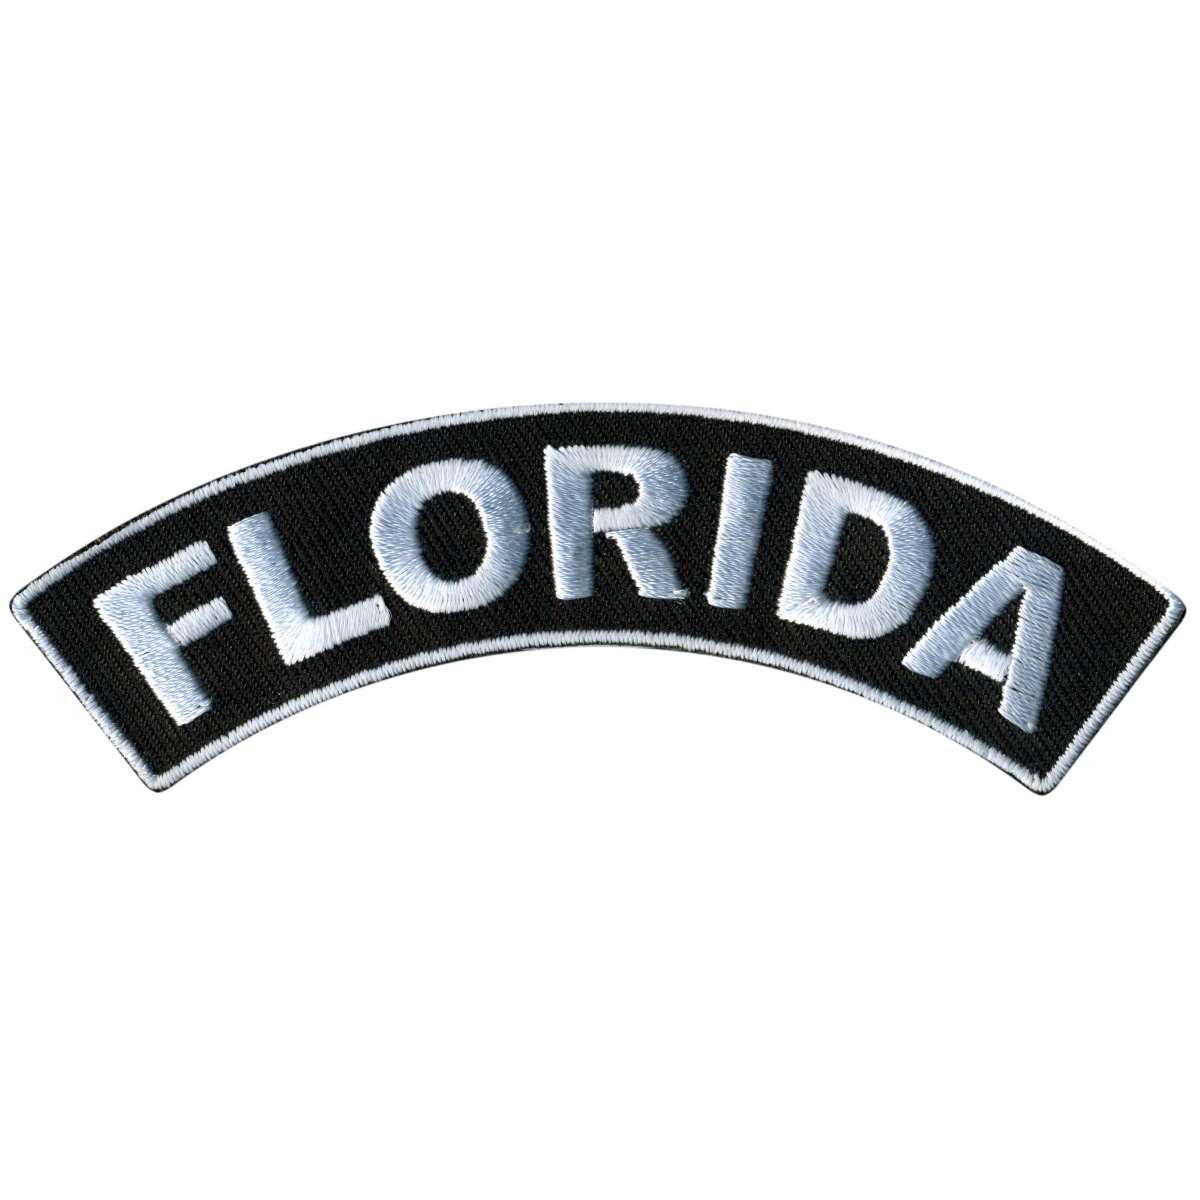 Hot Leathers Florida 4” X 1” Top Rocker Patch PPM4018